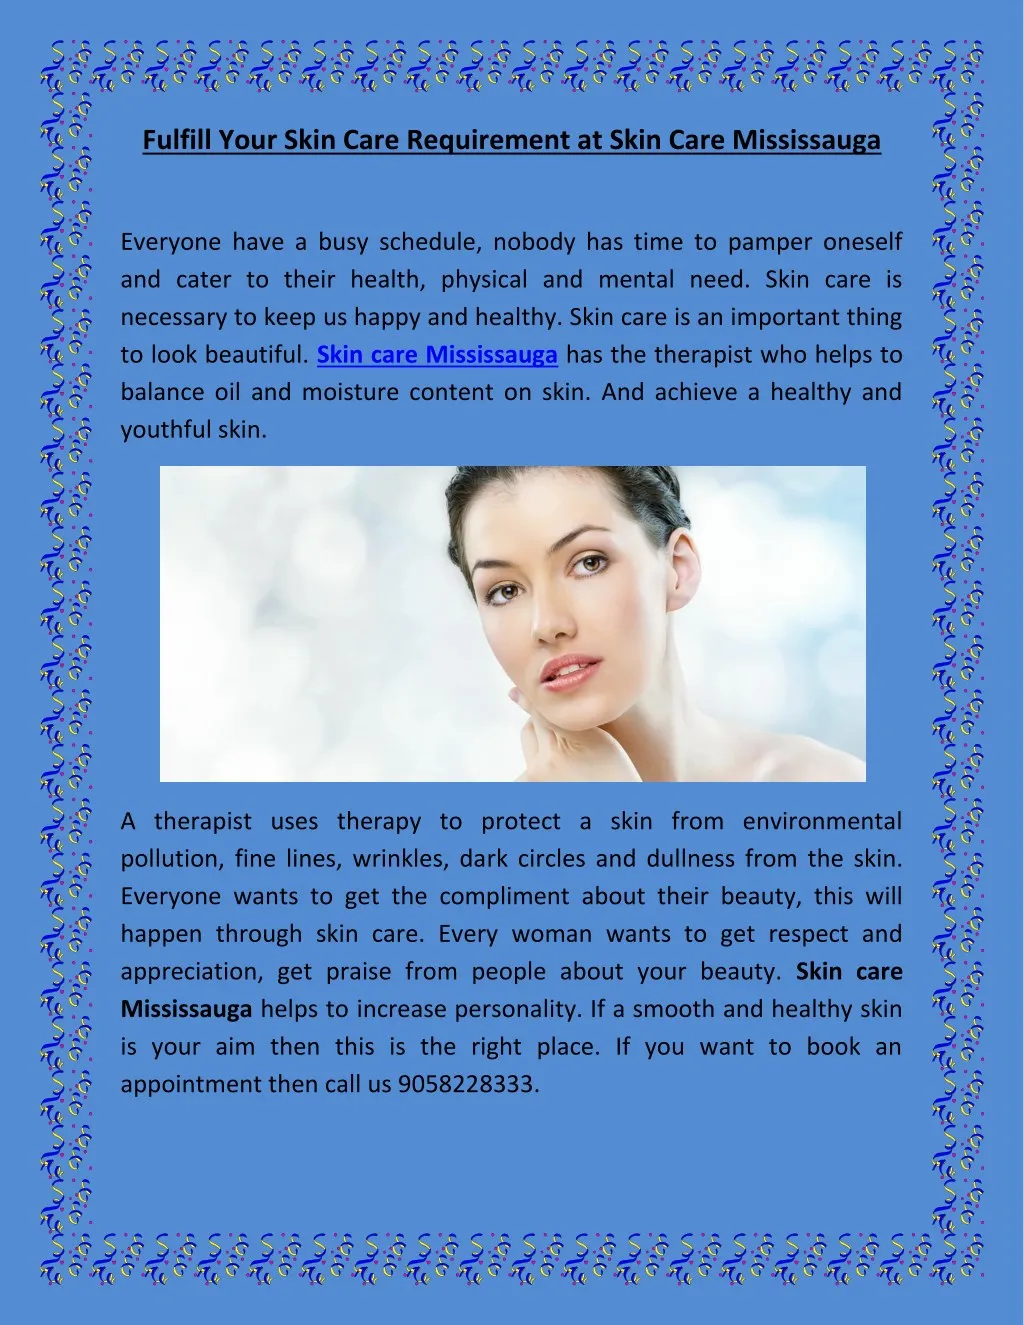 fulfill your skin care requirement at skin care